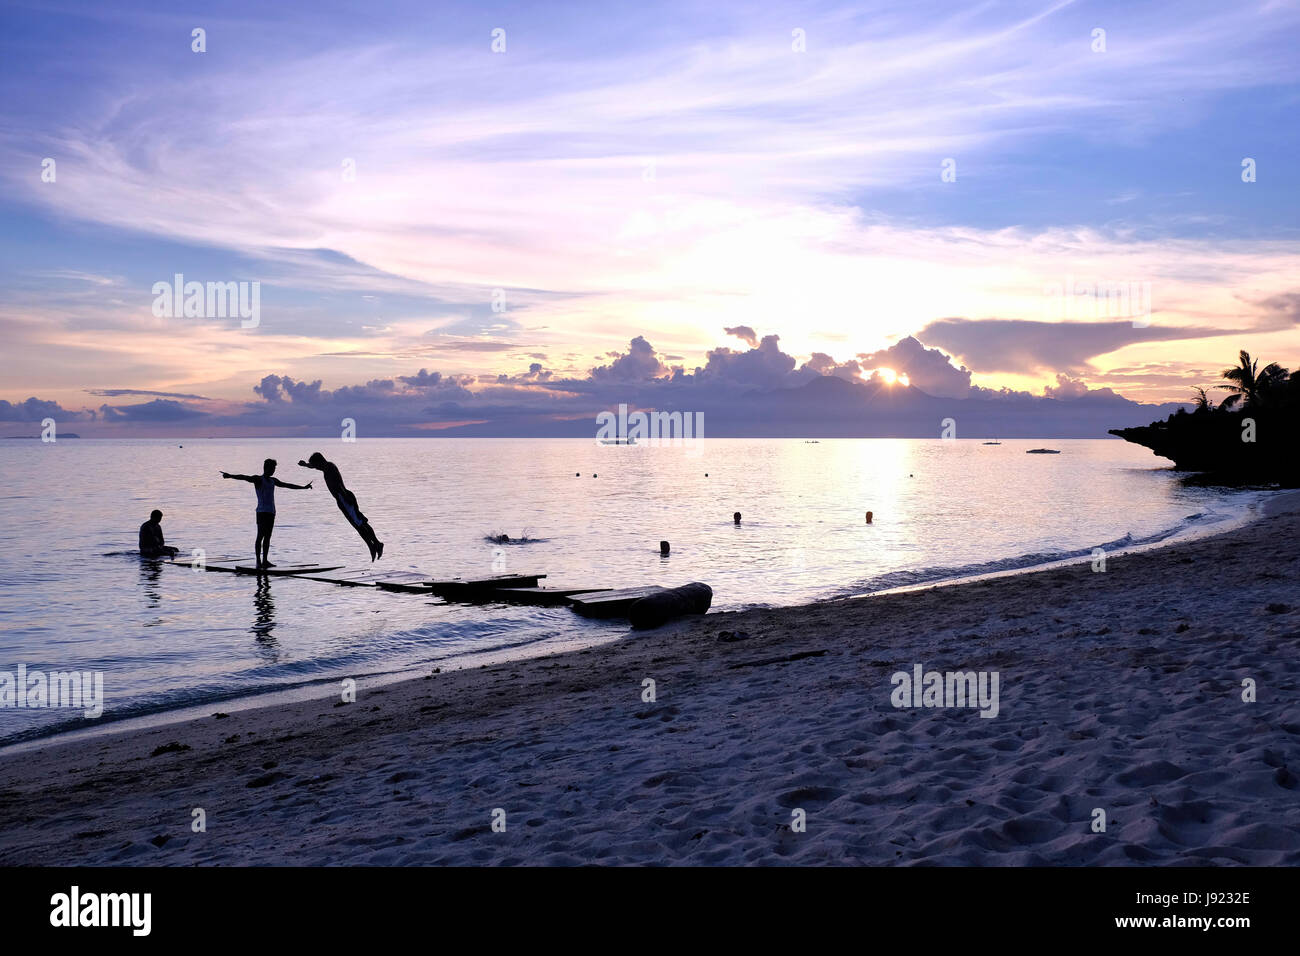 People bathing at sunset in the island of Siquijor located in the Central Visayas region of the Philippines Stock Photo